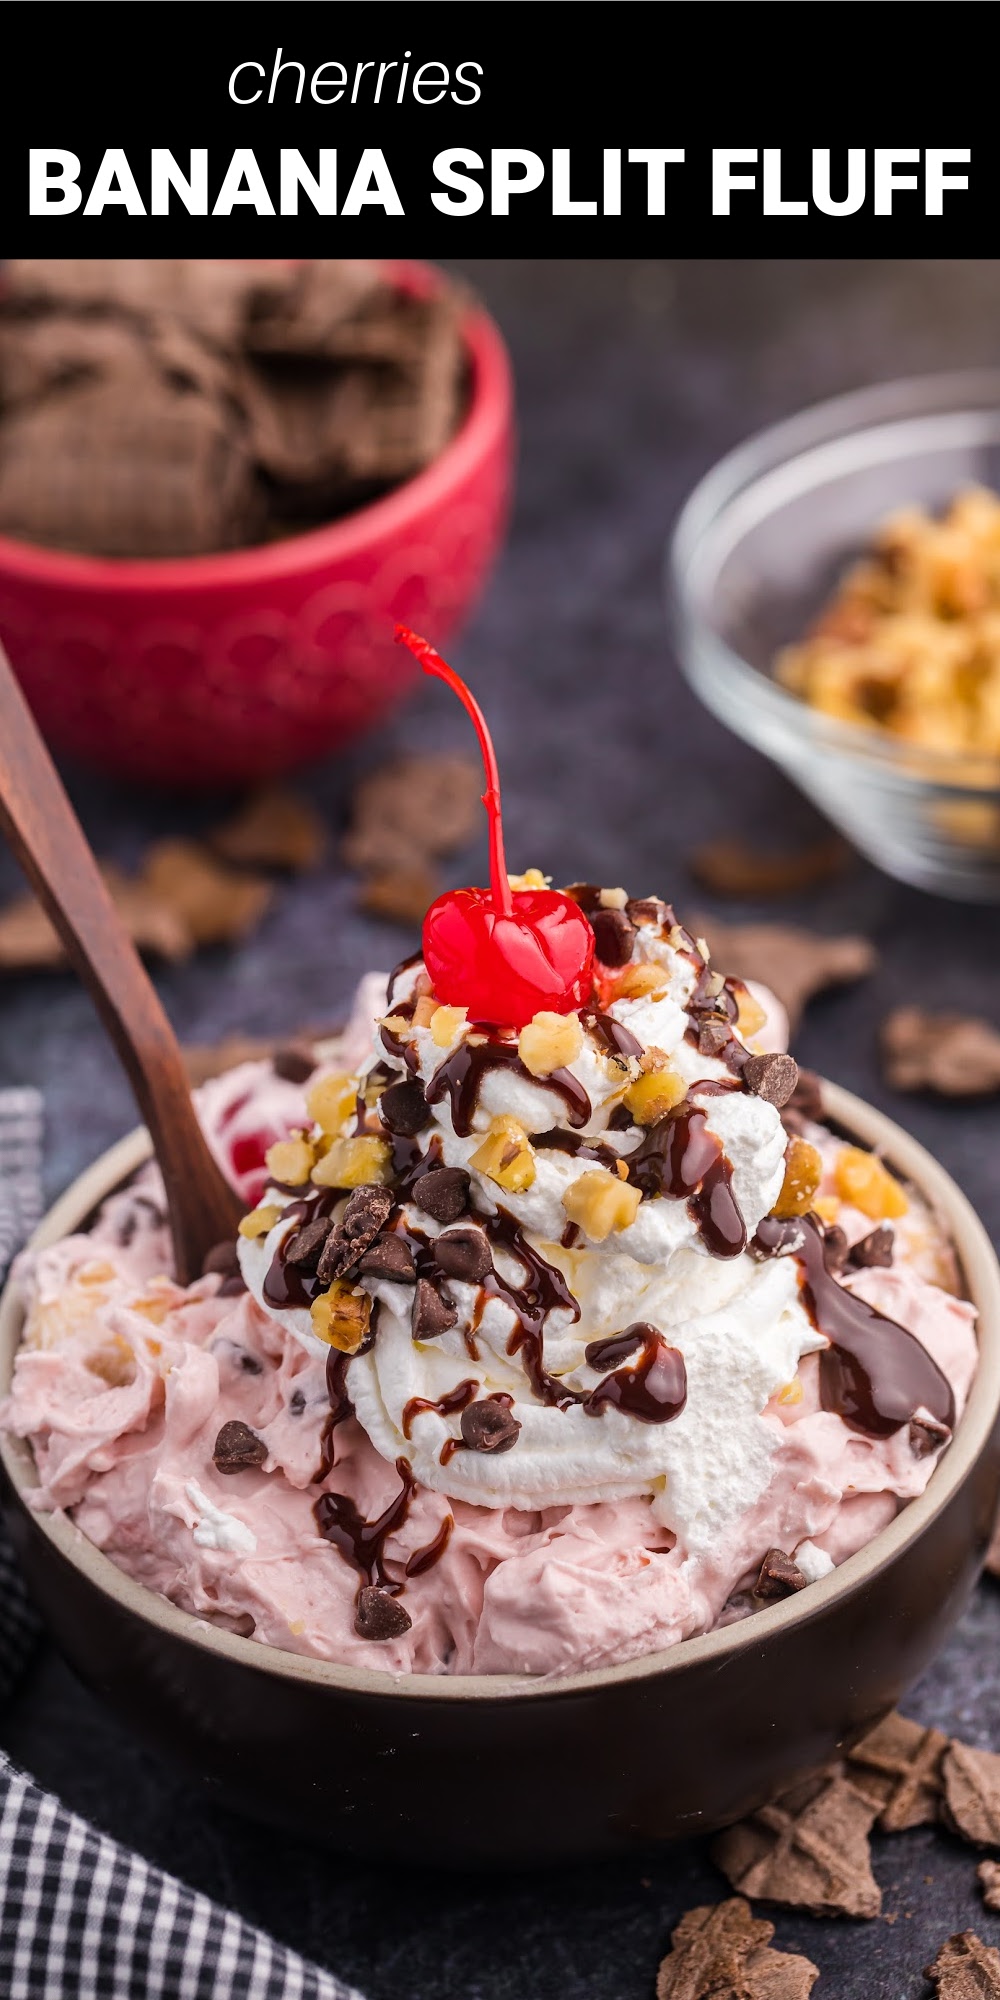 This yummy Banana Split Fluff salad is an easy dump and go, no bake dessert recipe that only takes 5 minutes and a handful of ingredients to make. It’s loaded with all the flavors of your favorite banana split toppings, but in a light and fluffy salad your whole family will love!